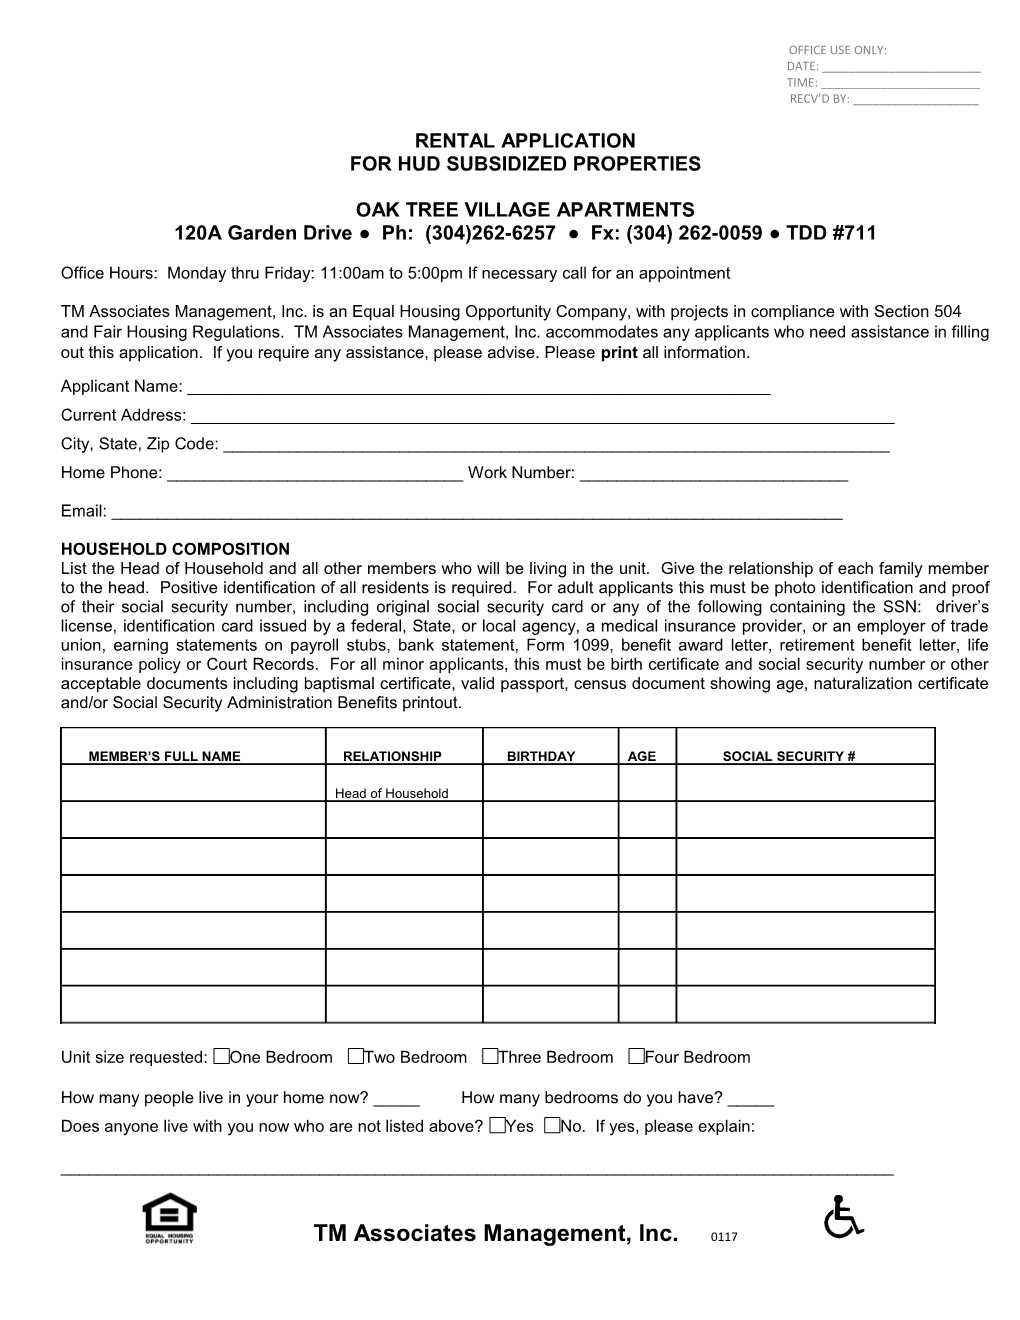 Tmam Rental Application Page 1 of 8